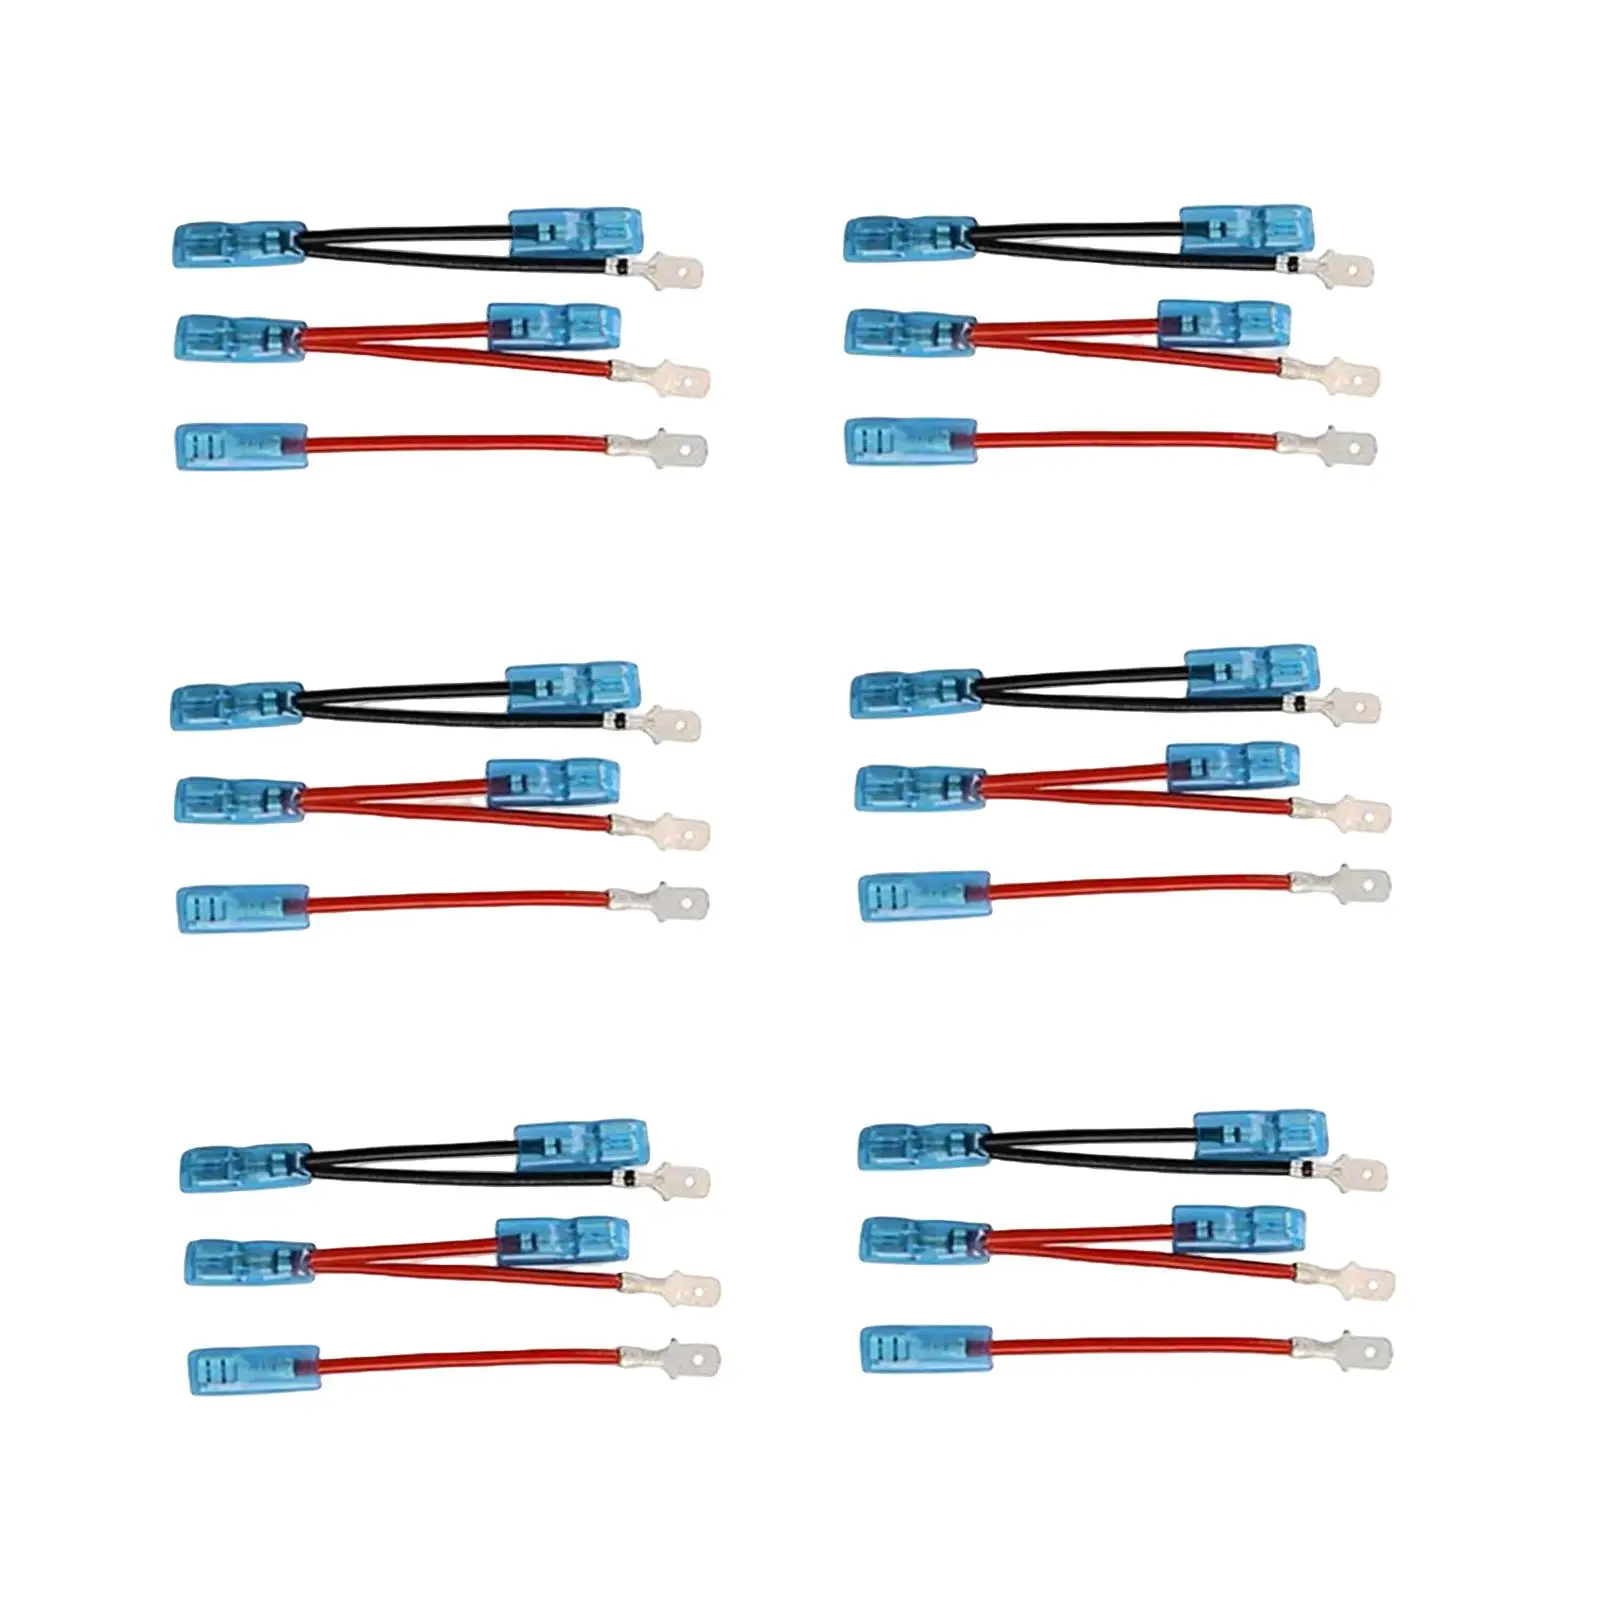 6Pcs 5 Pin Rocker Switch Jumper Wires Set Accessories for Marine Car